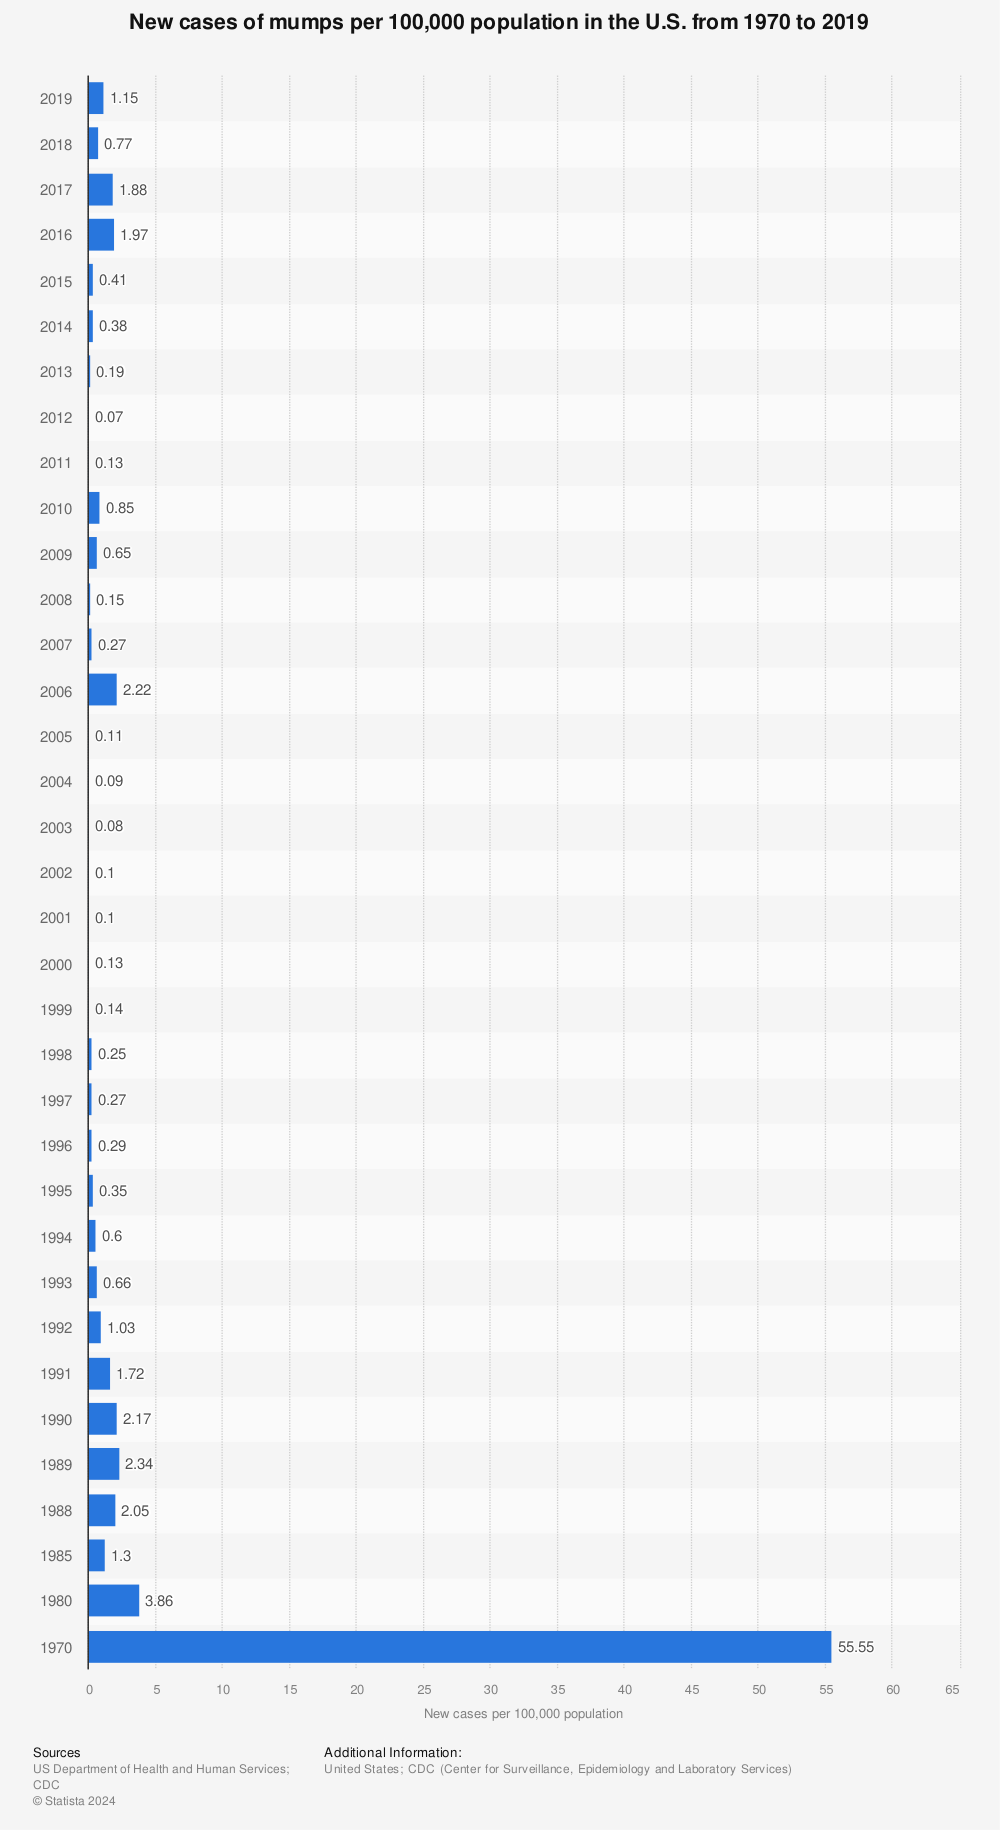 Statistic: New cases of mumps per 100,000 population in the U.S. from 1970 to 2019 | Statista